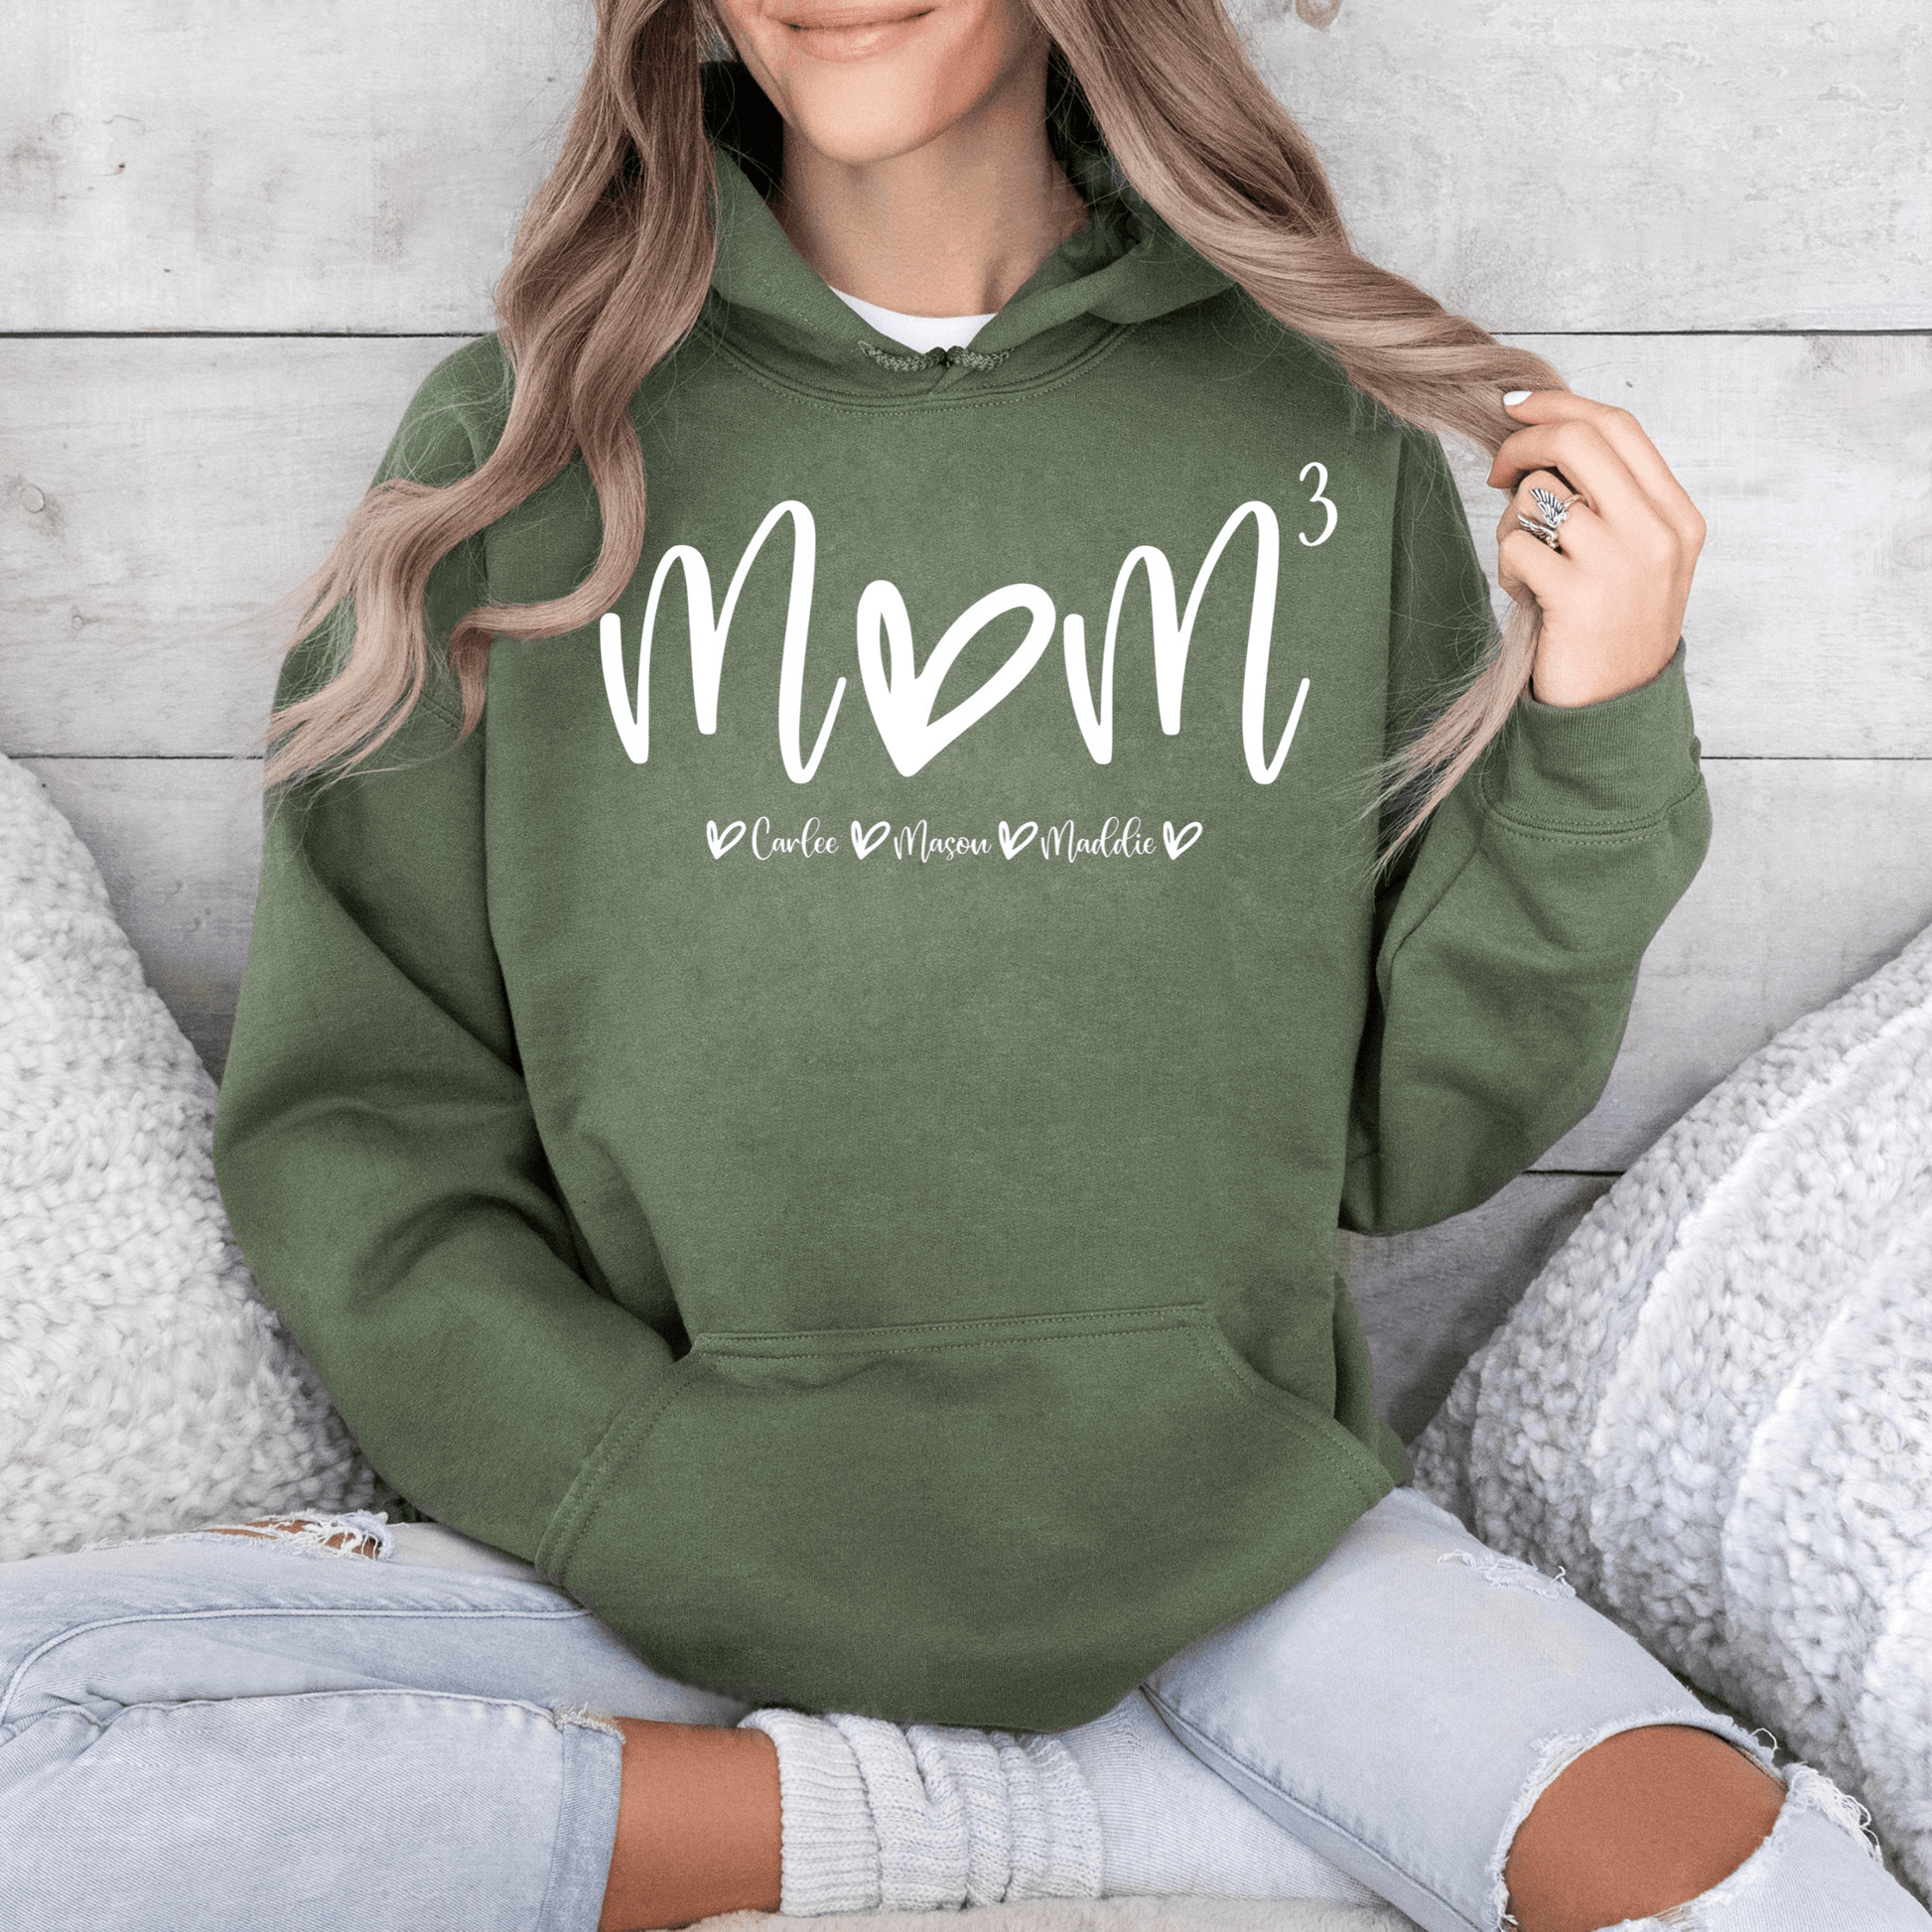 "Mom^N" Shirt: Customize Kids' Count & Names - Perfect Gift - GiftHaus